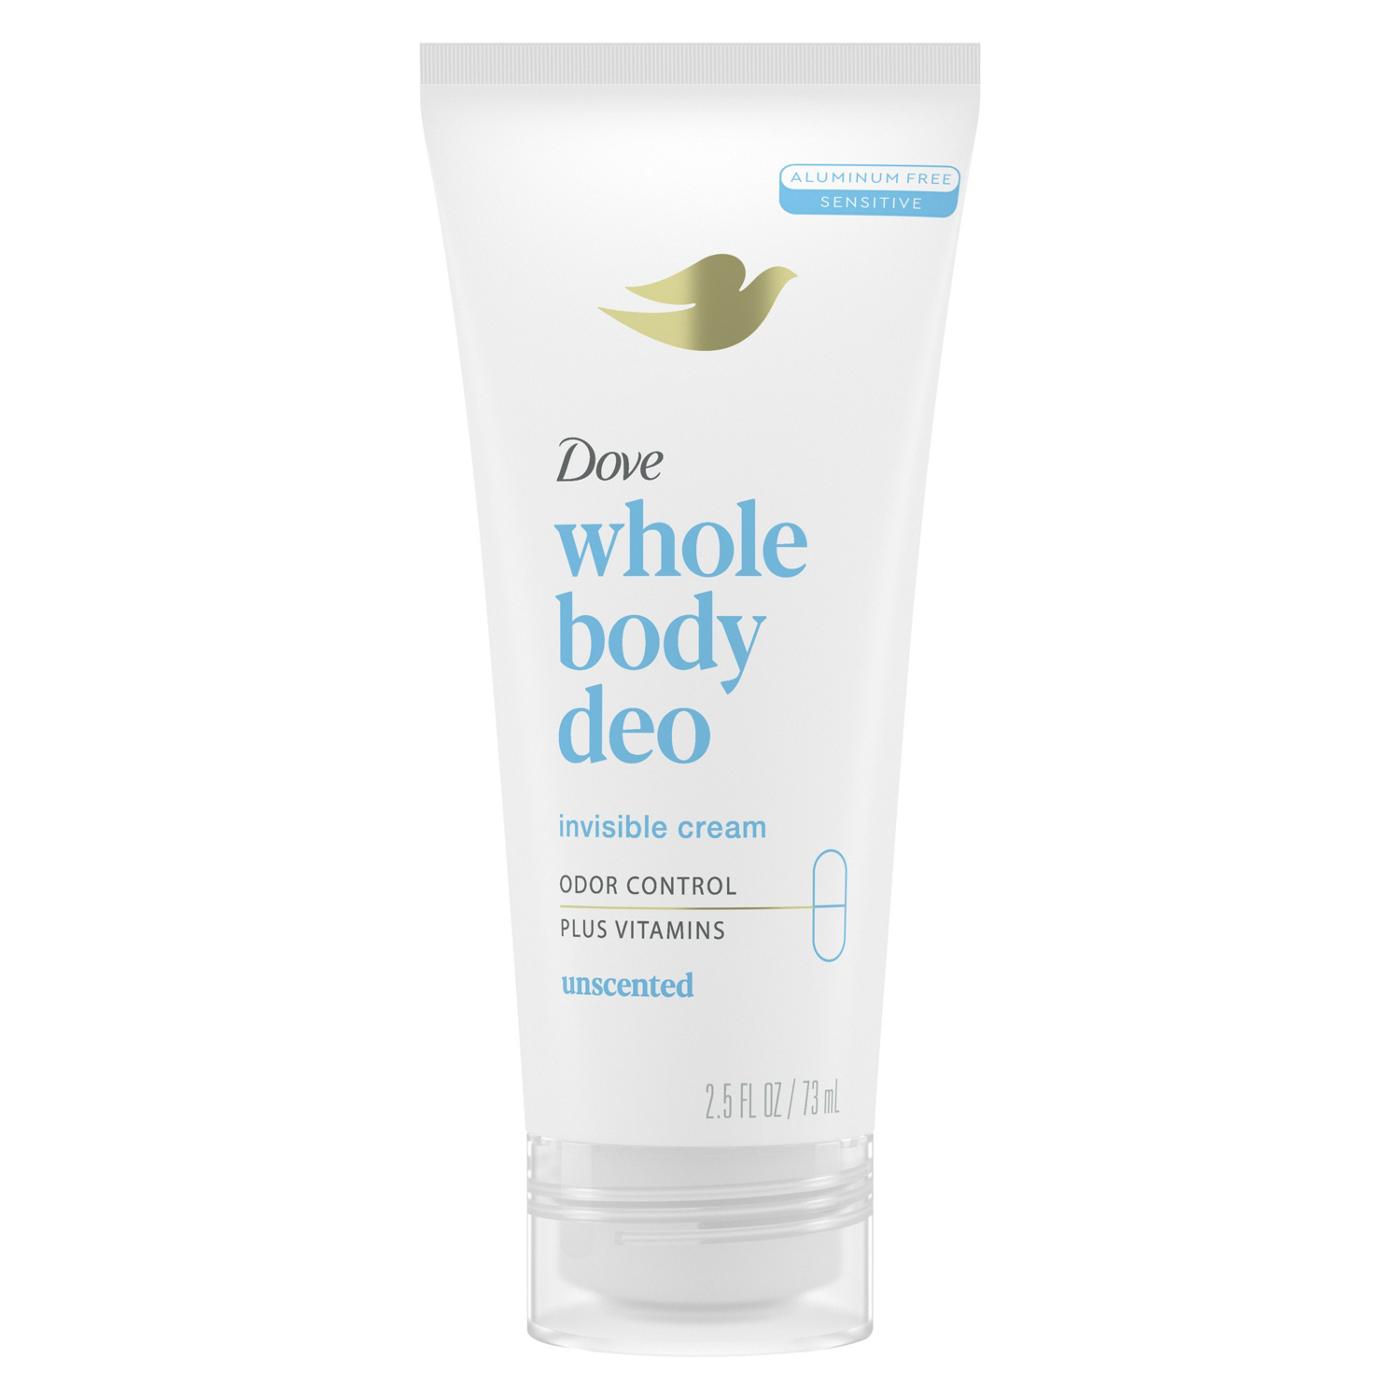 Dove Whole Body Deo Cream - Unscented; image 1 of 2